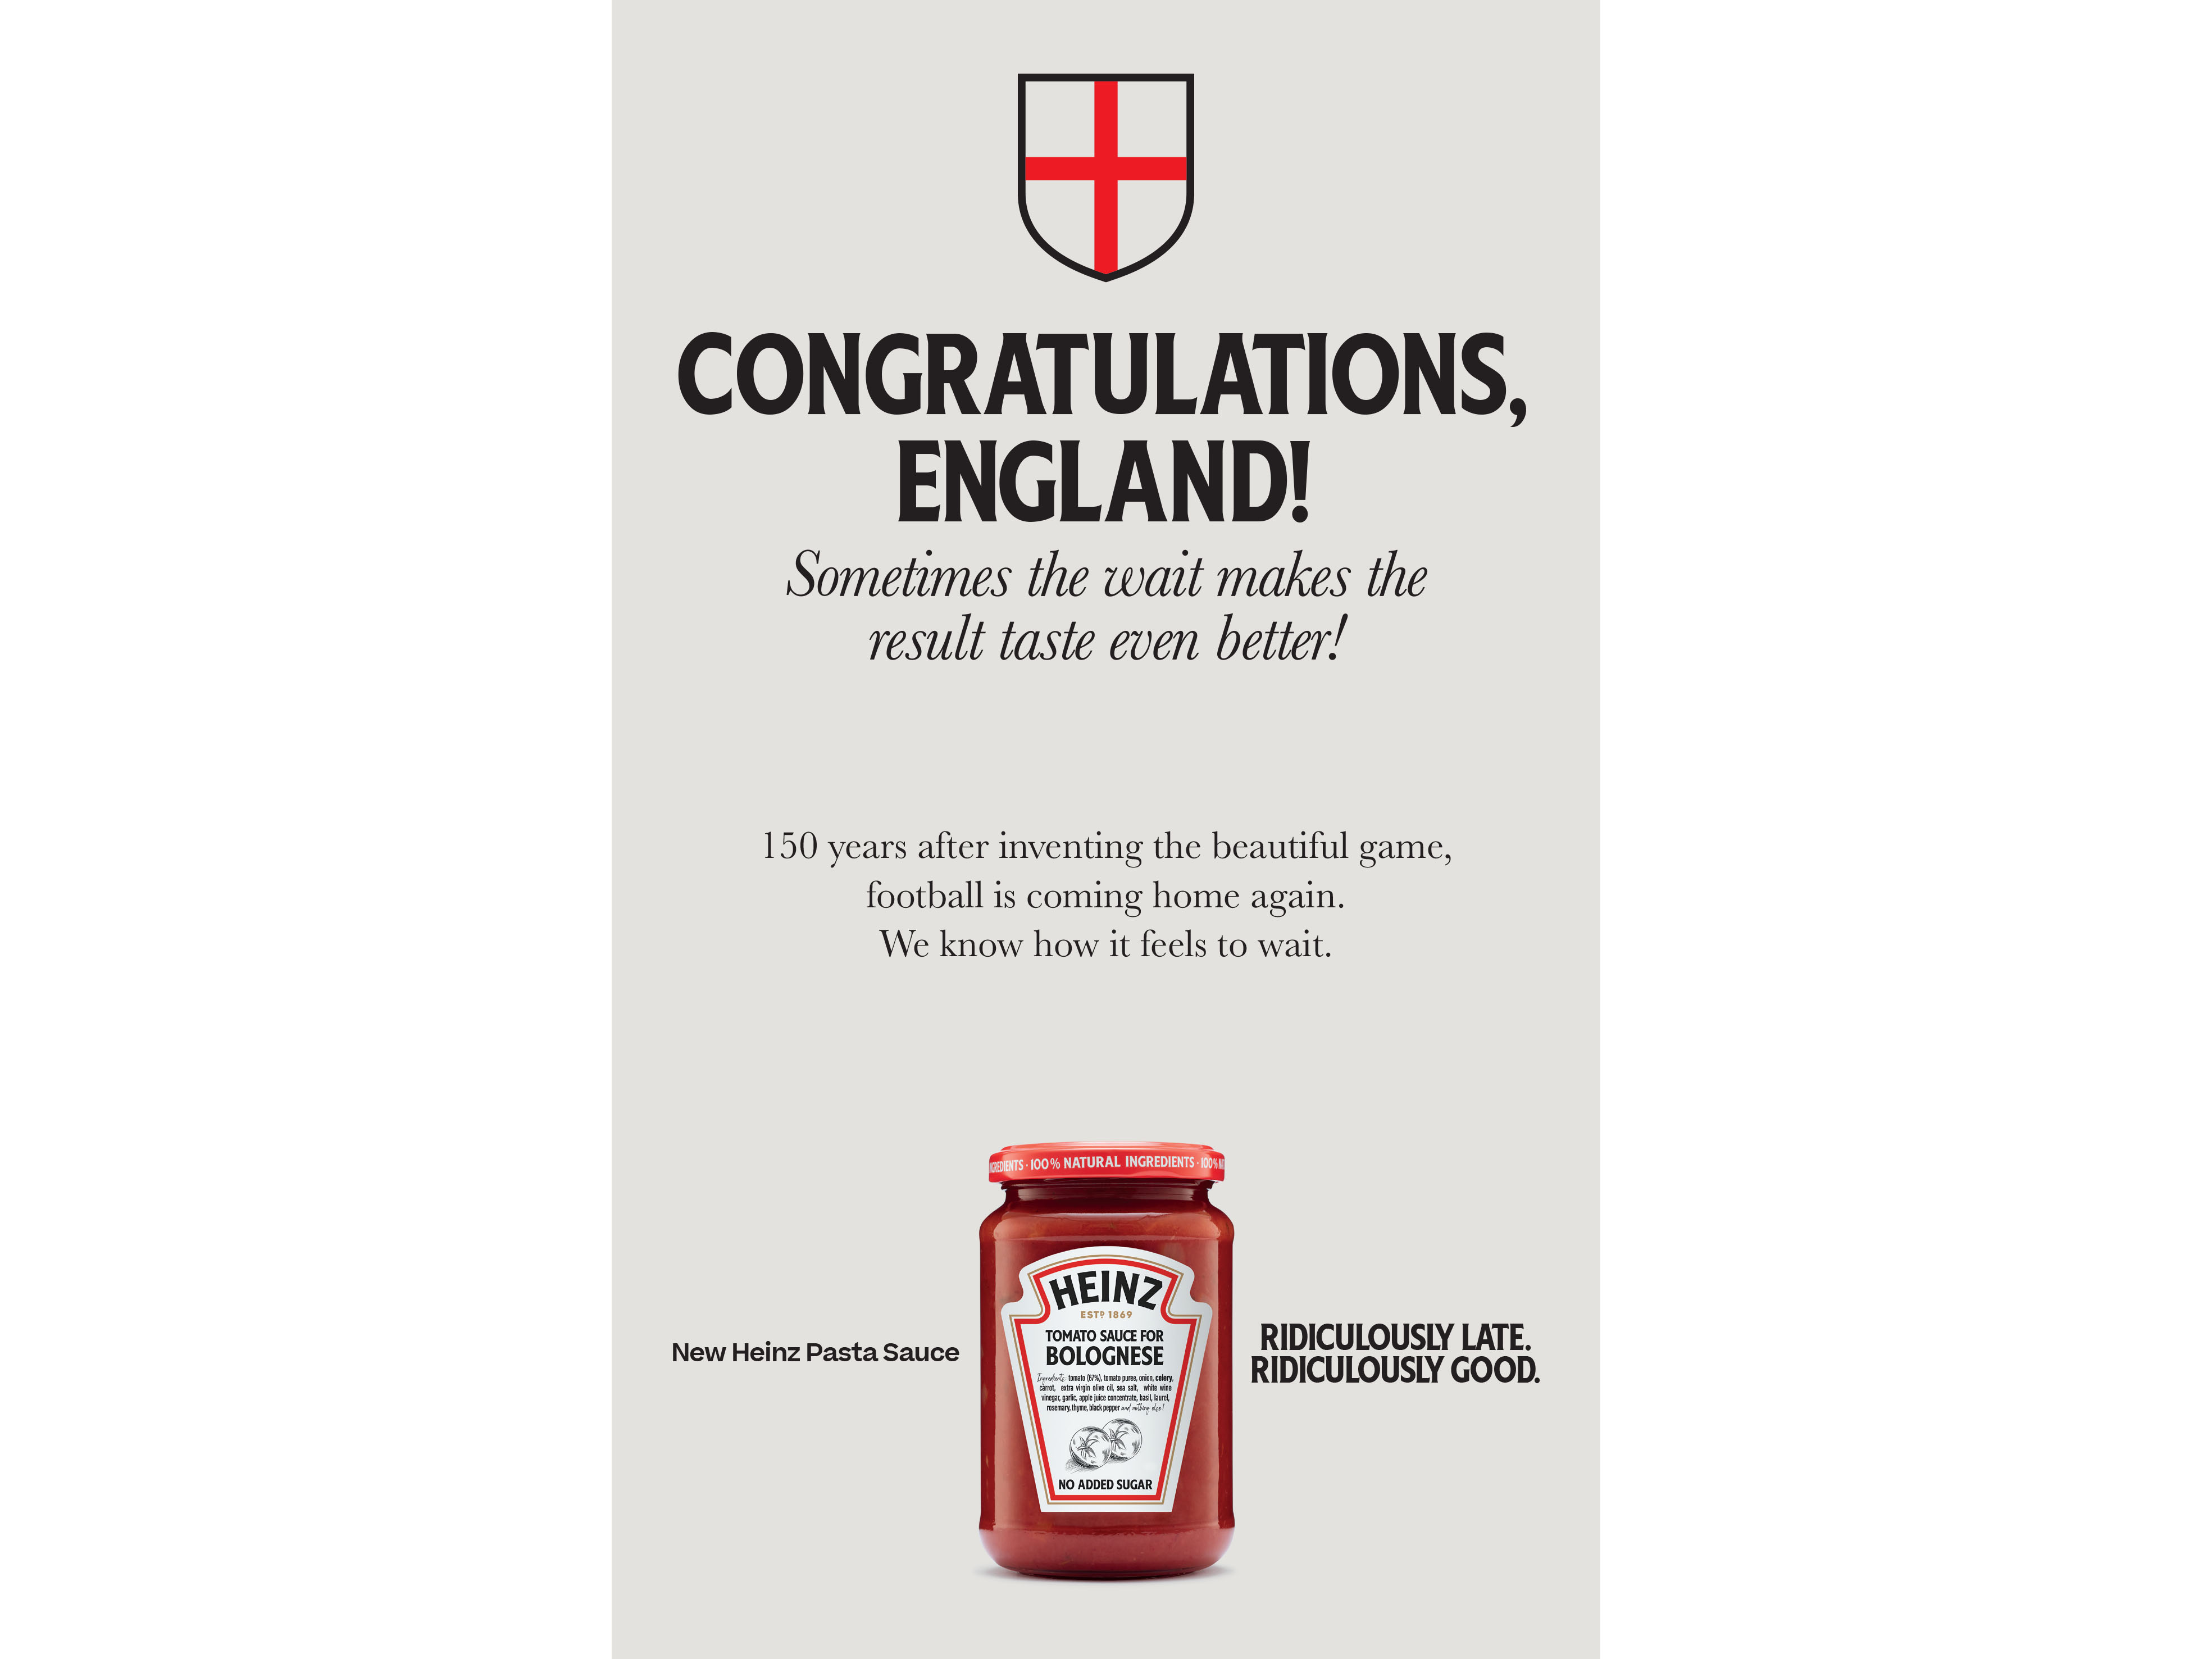 Heinz celebrates the ‘Ridiculously Late, Ridiculously Good’ win for England